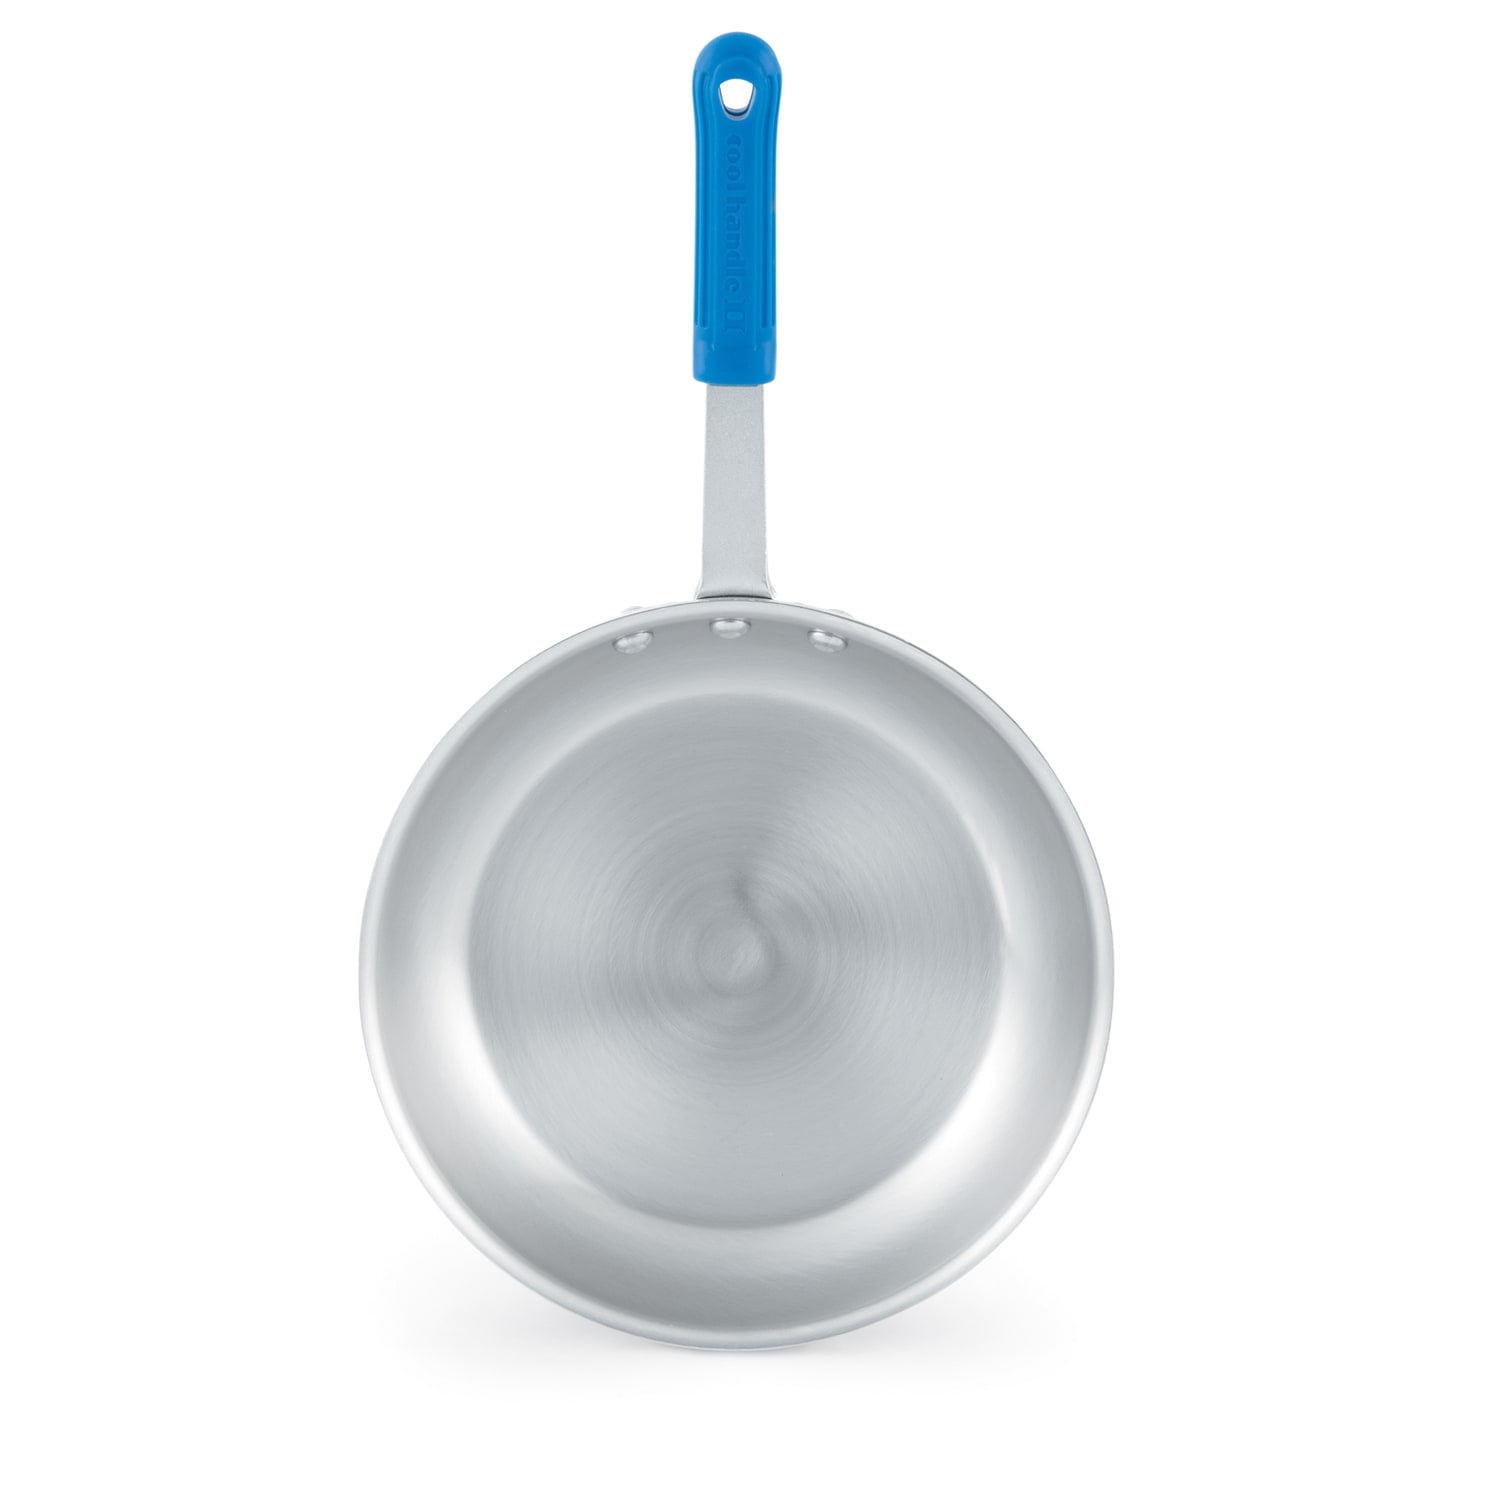 Vollrath 4010 Wear-Ever 10 Aluminum Fry Pan with Blue Cool Handle